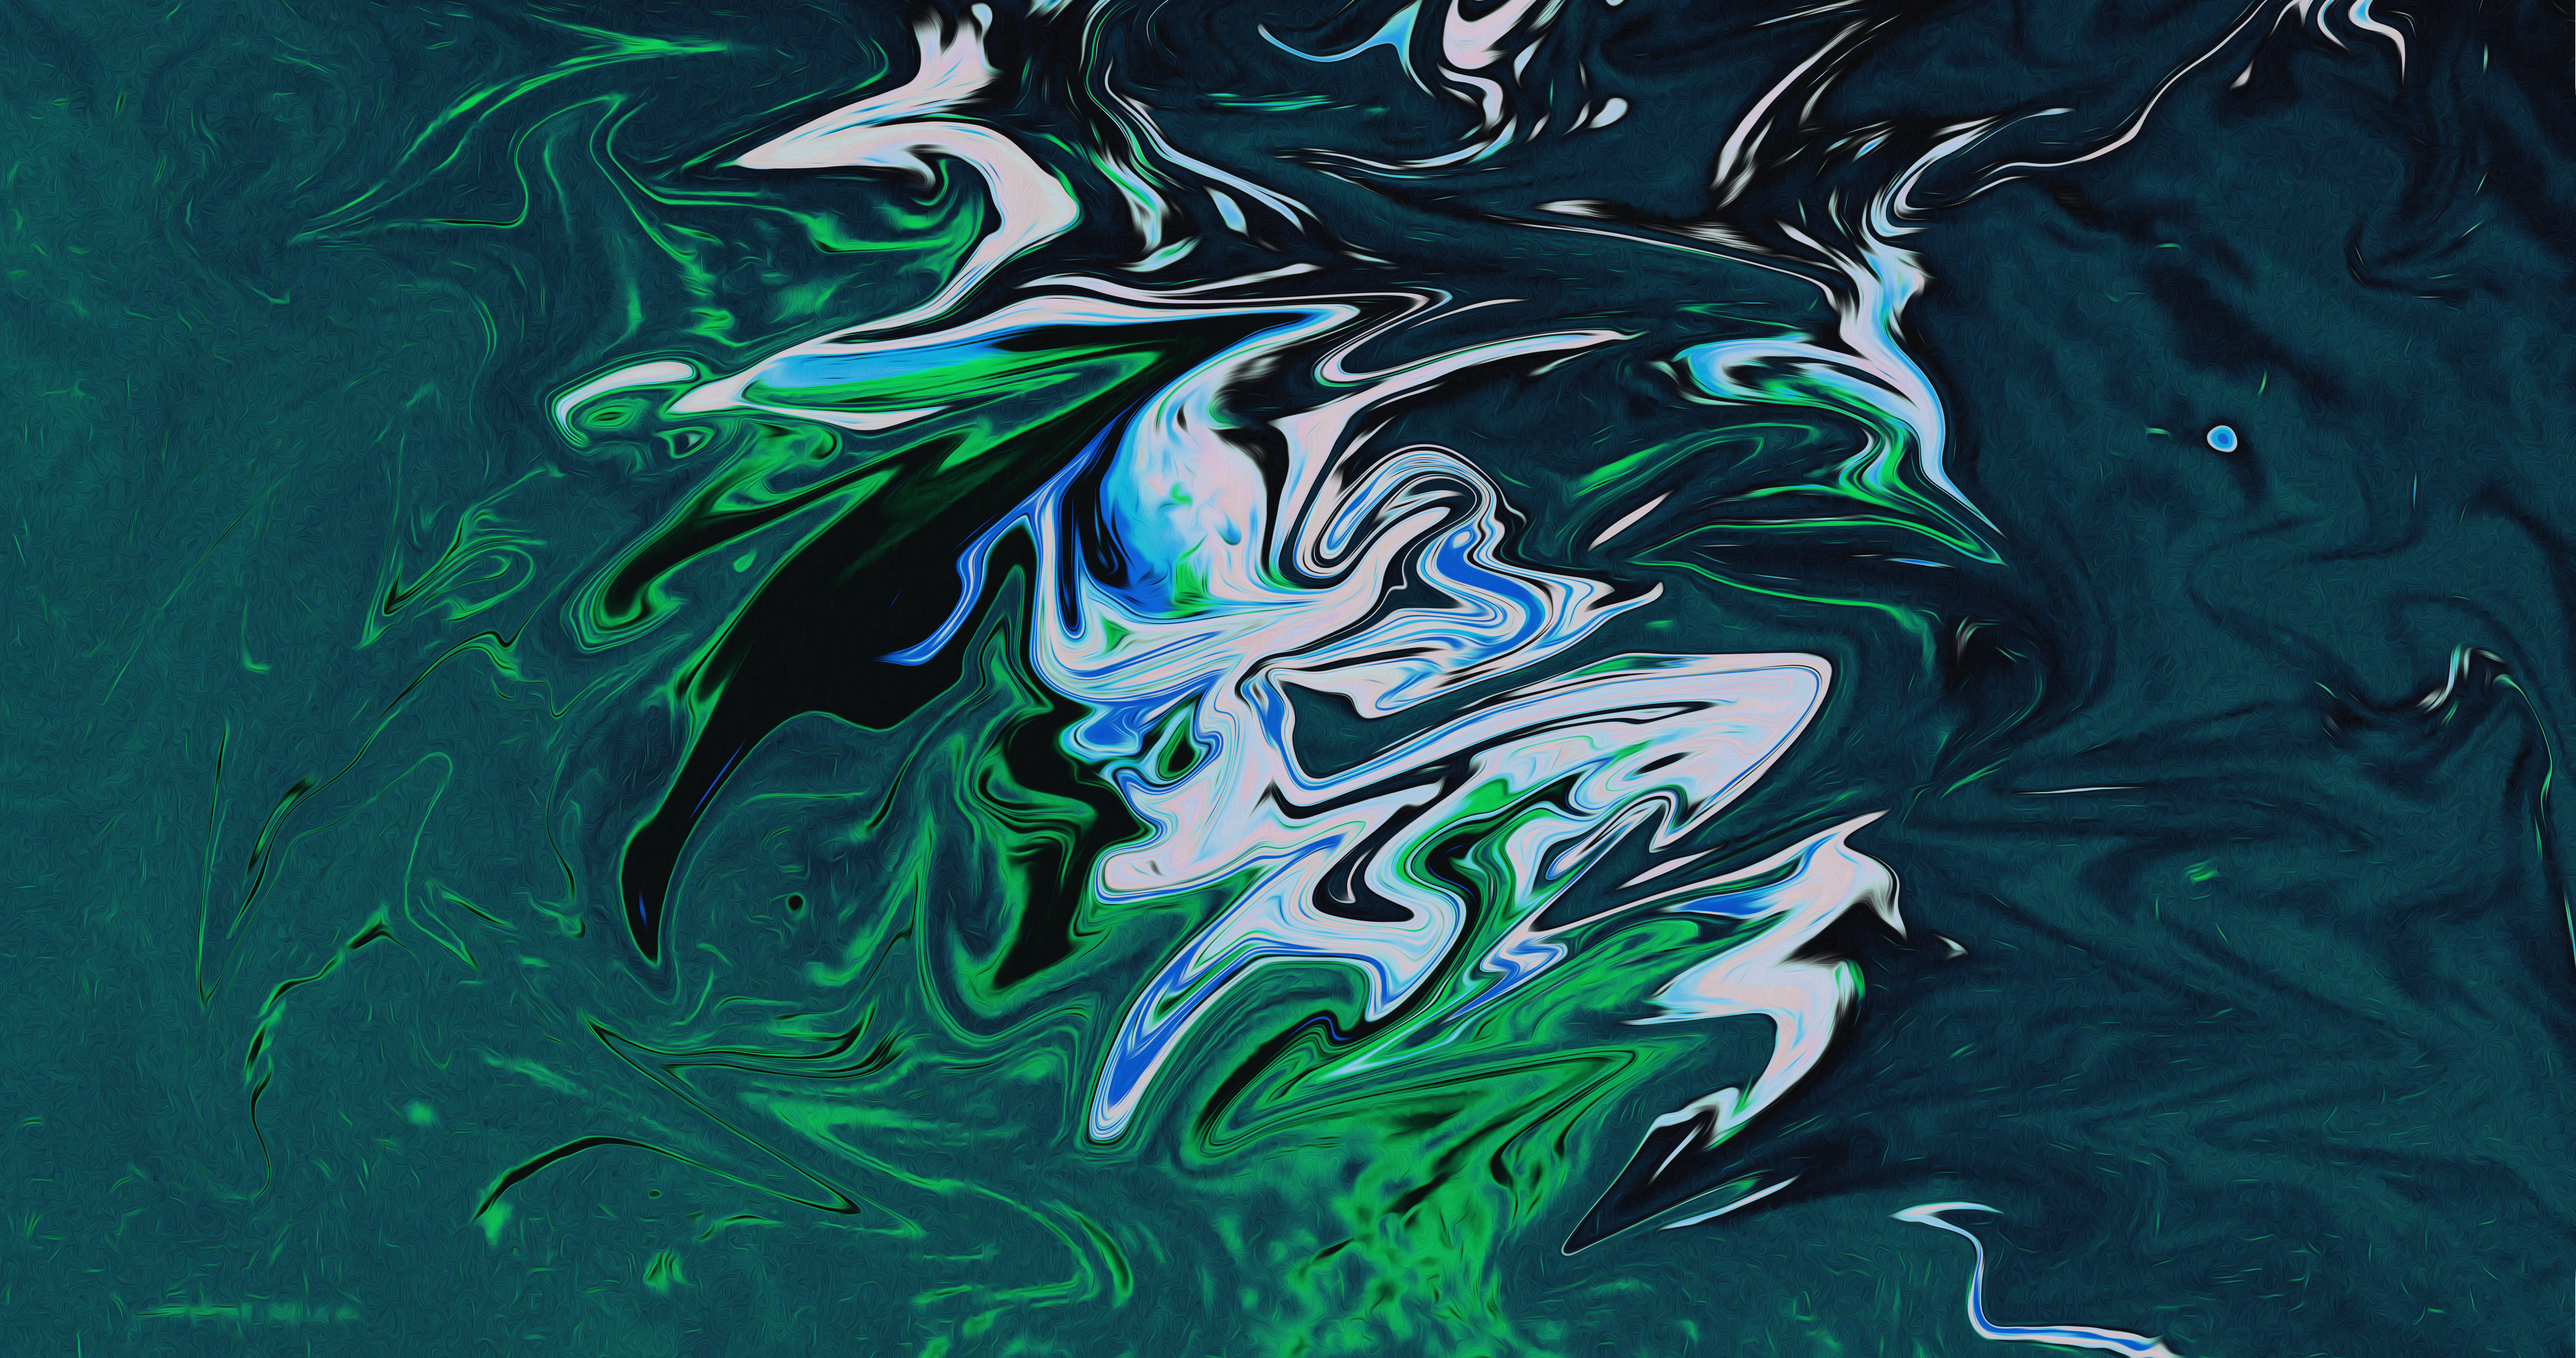 Abstract Fluid Liquid Interference Dark Green Colorful Artwork Digital Art Paint Brushes Oil Paintin 8192x4320